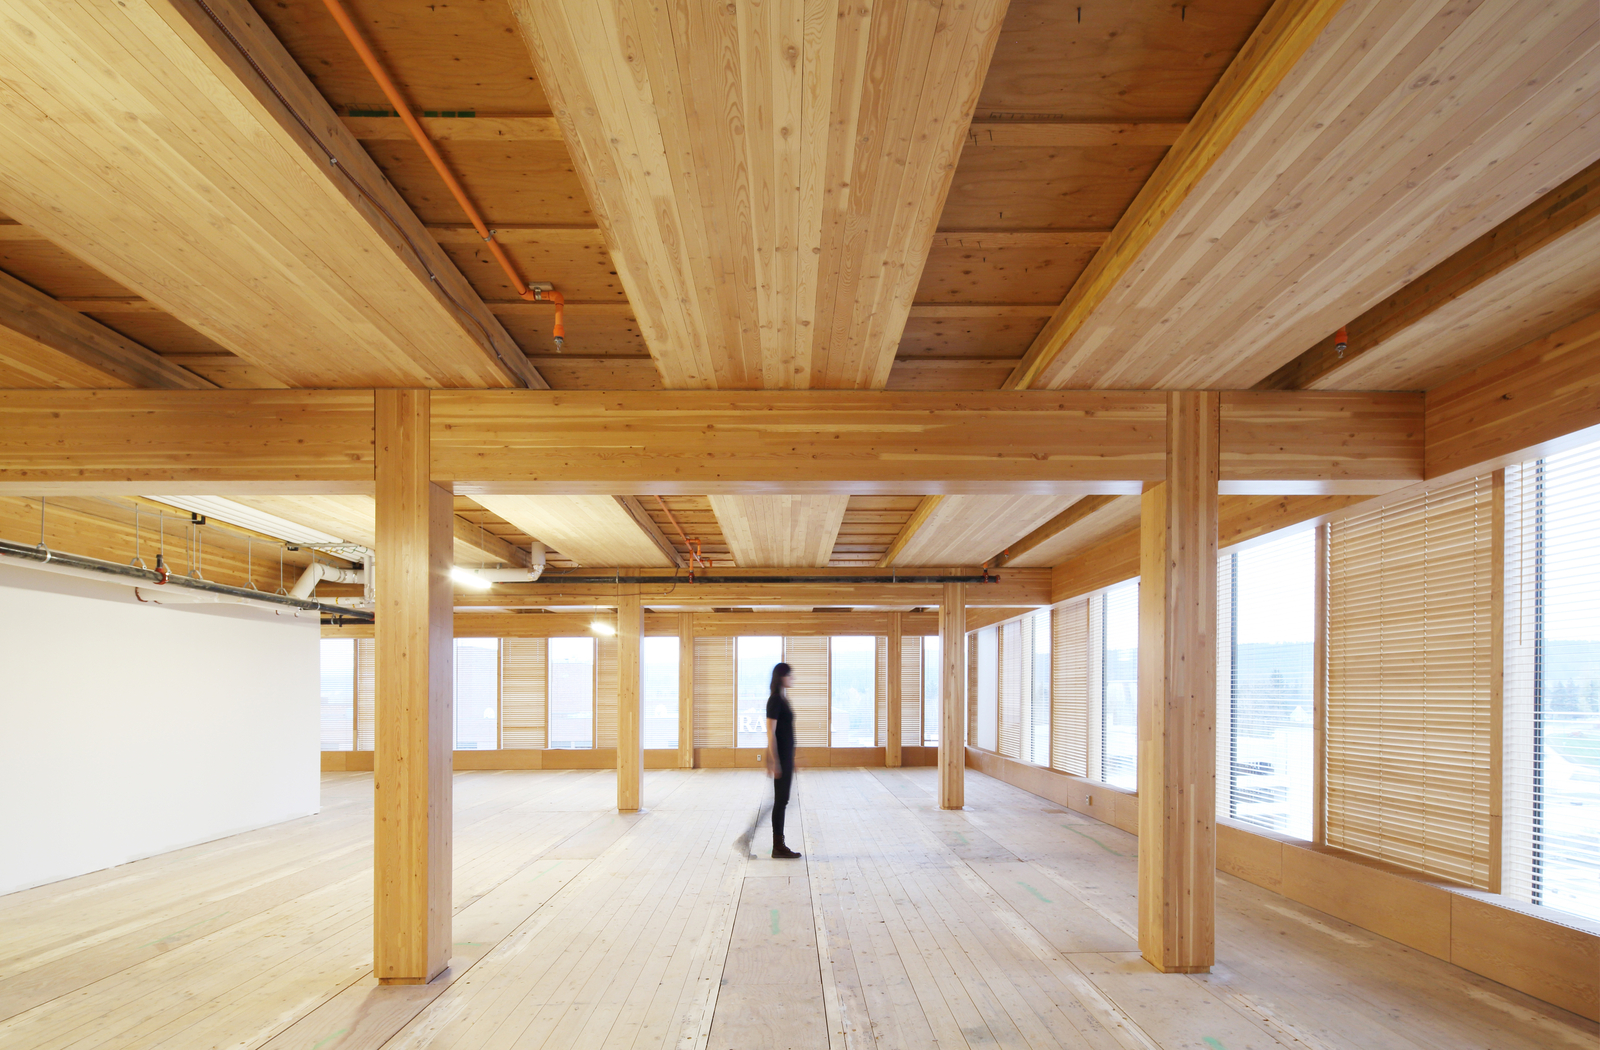 Interior daytime view of woman walking in multi storey mass timber structure showing extensive use of wood, including glue-laminated (glulam) timber beams and columns supporting plywood subfloor above and hardwood flooring below